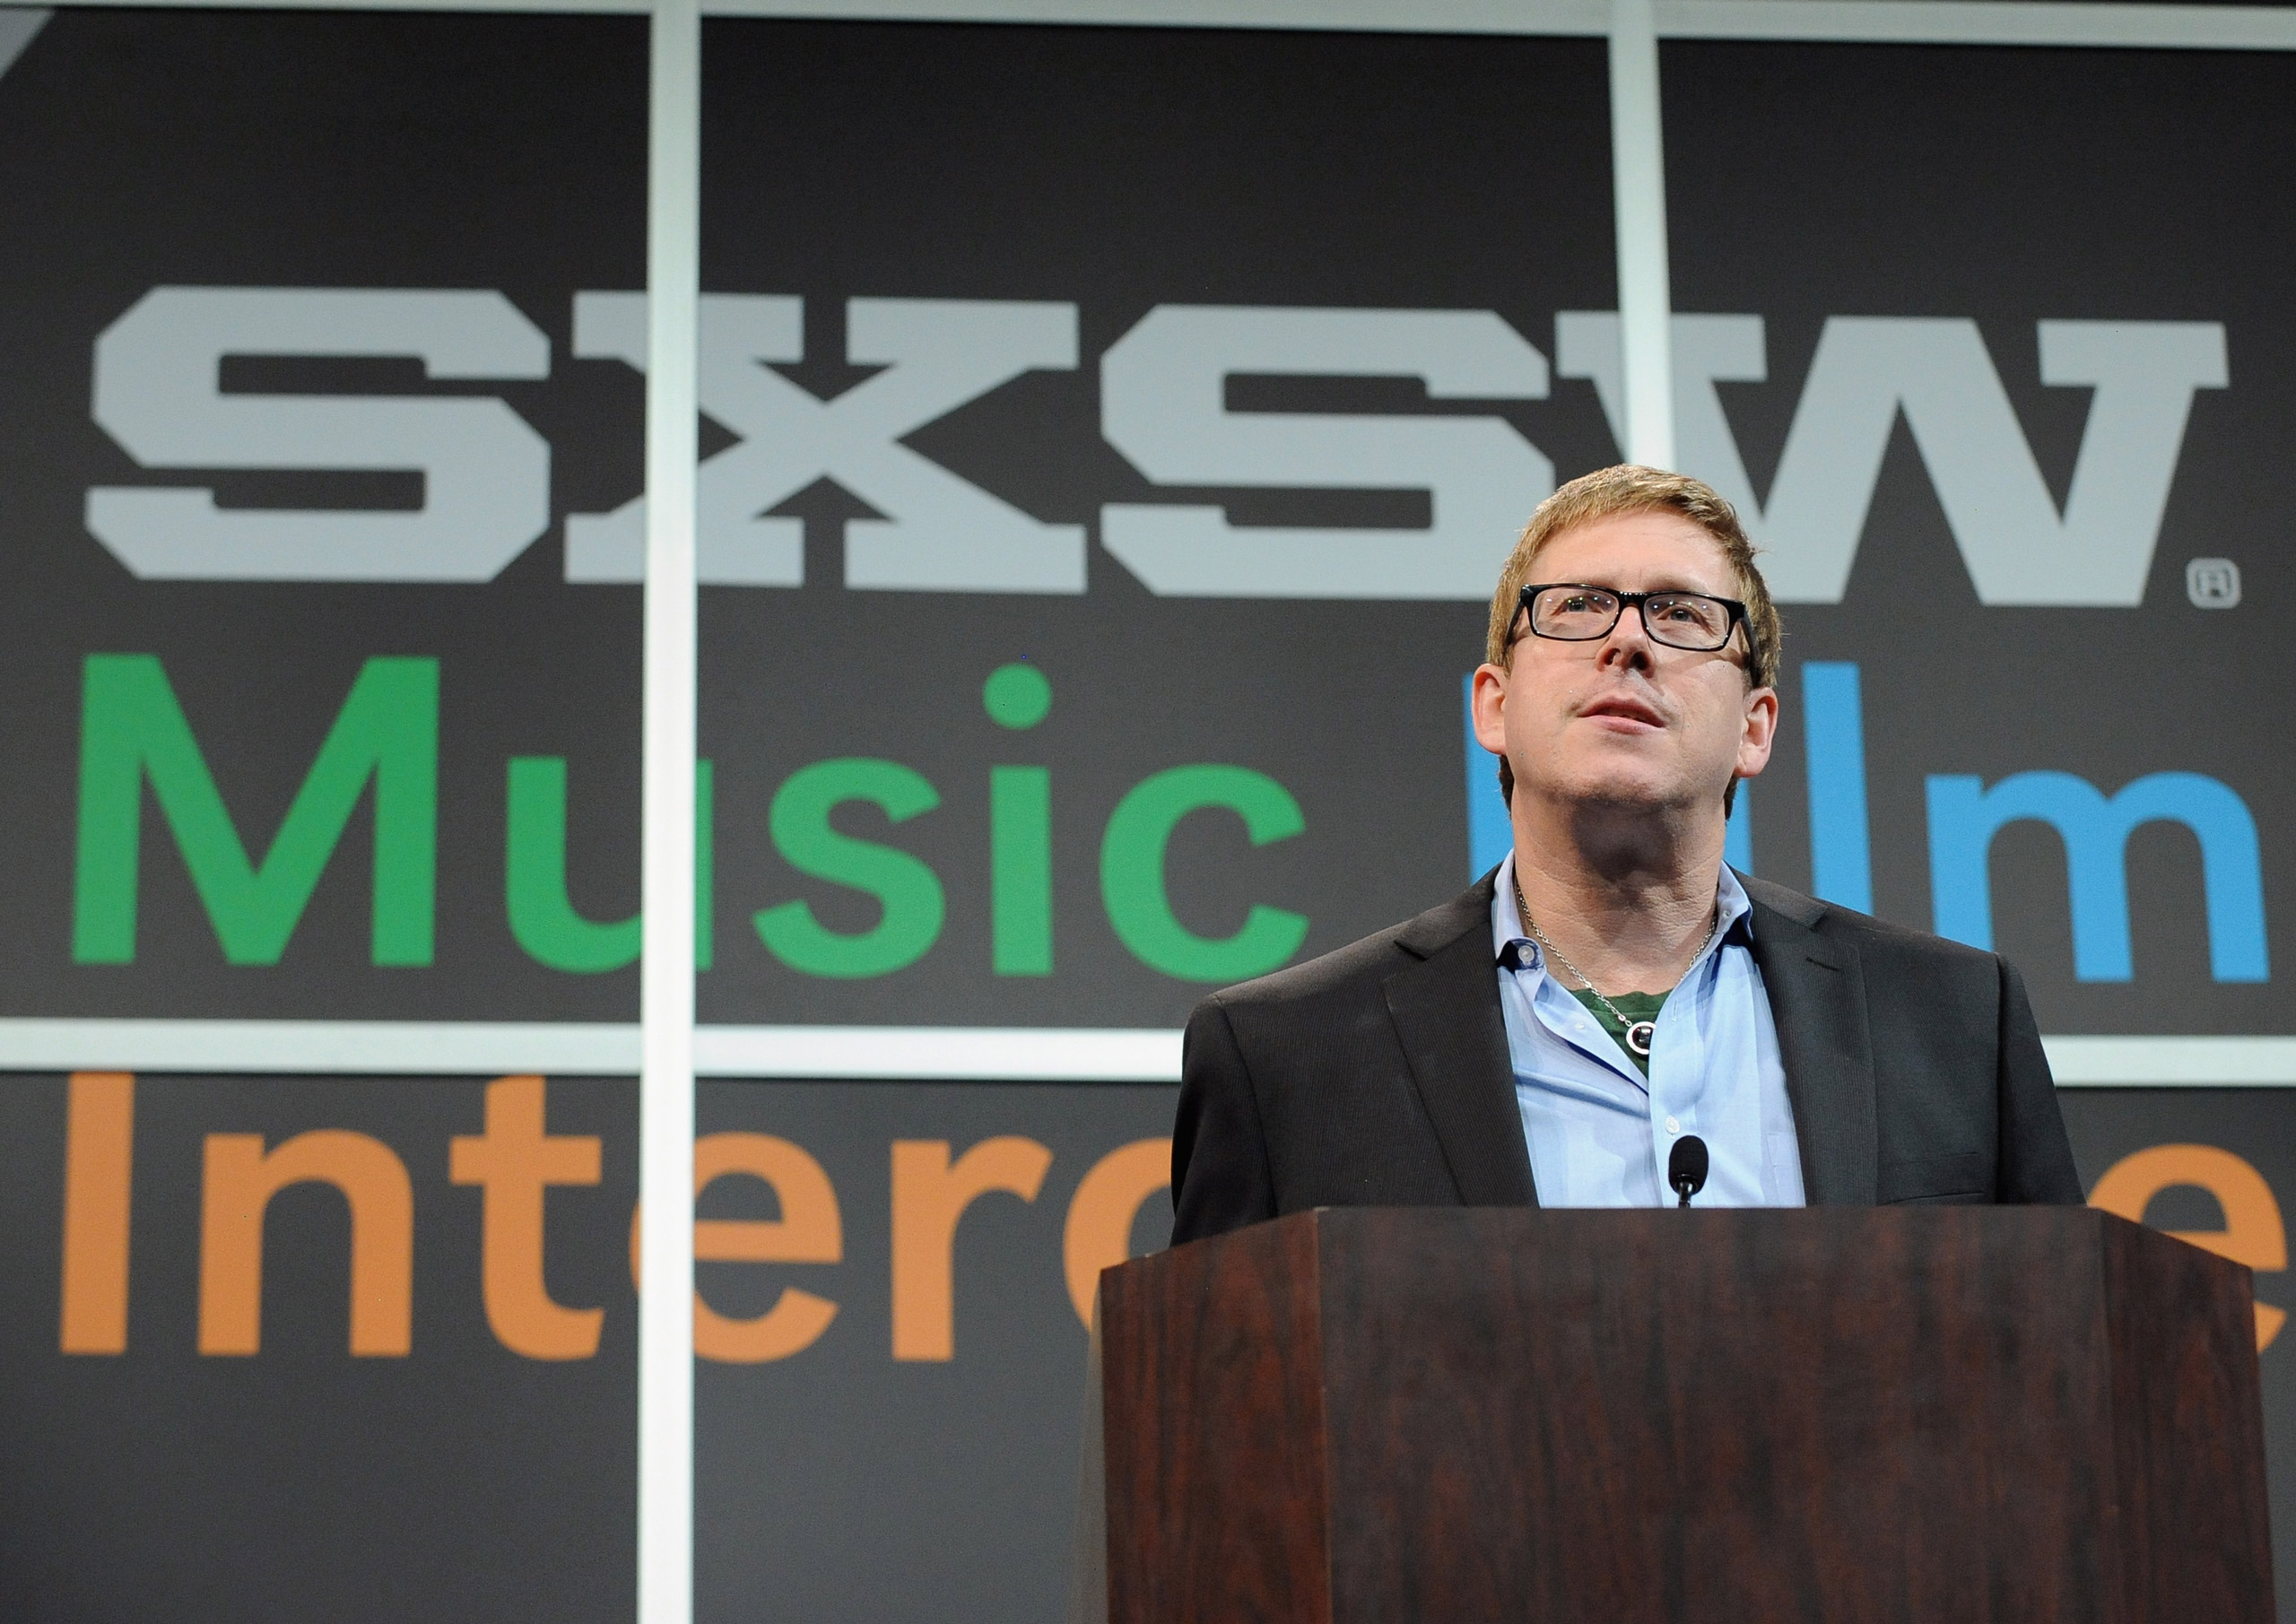 AUSTIN, TX - MARCH 11:  Hugh Forrest, SXSW Interactive's Director speaks onstage at Bruce Sterling Closing Remarks during the 2014 SXSW Music, Film + Interactive Festival at Austin Convention Center on March 11, 2014 in Austin, Texas.  (Photo by Jon Shapley/Getty Images for SXSW)